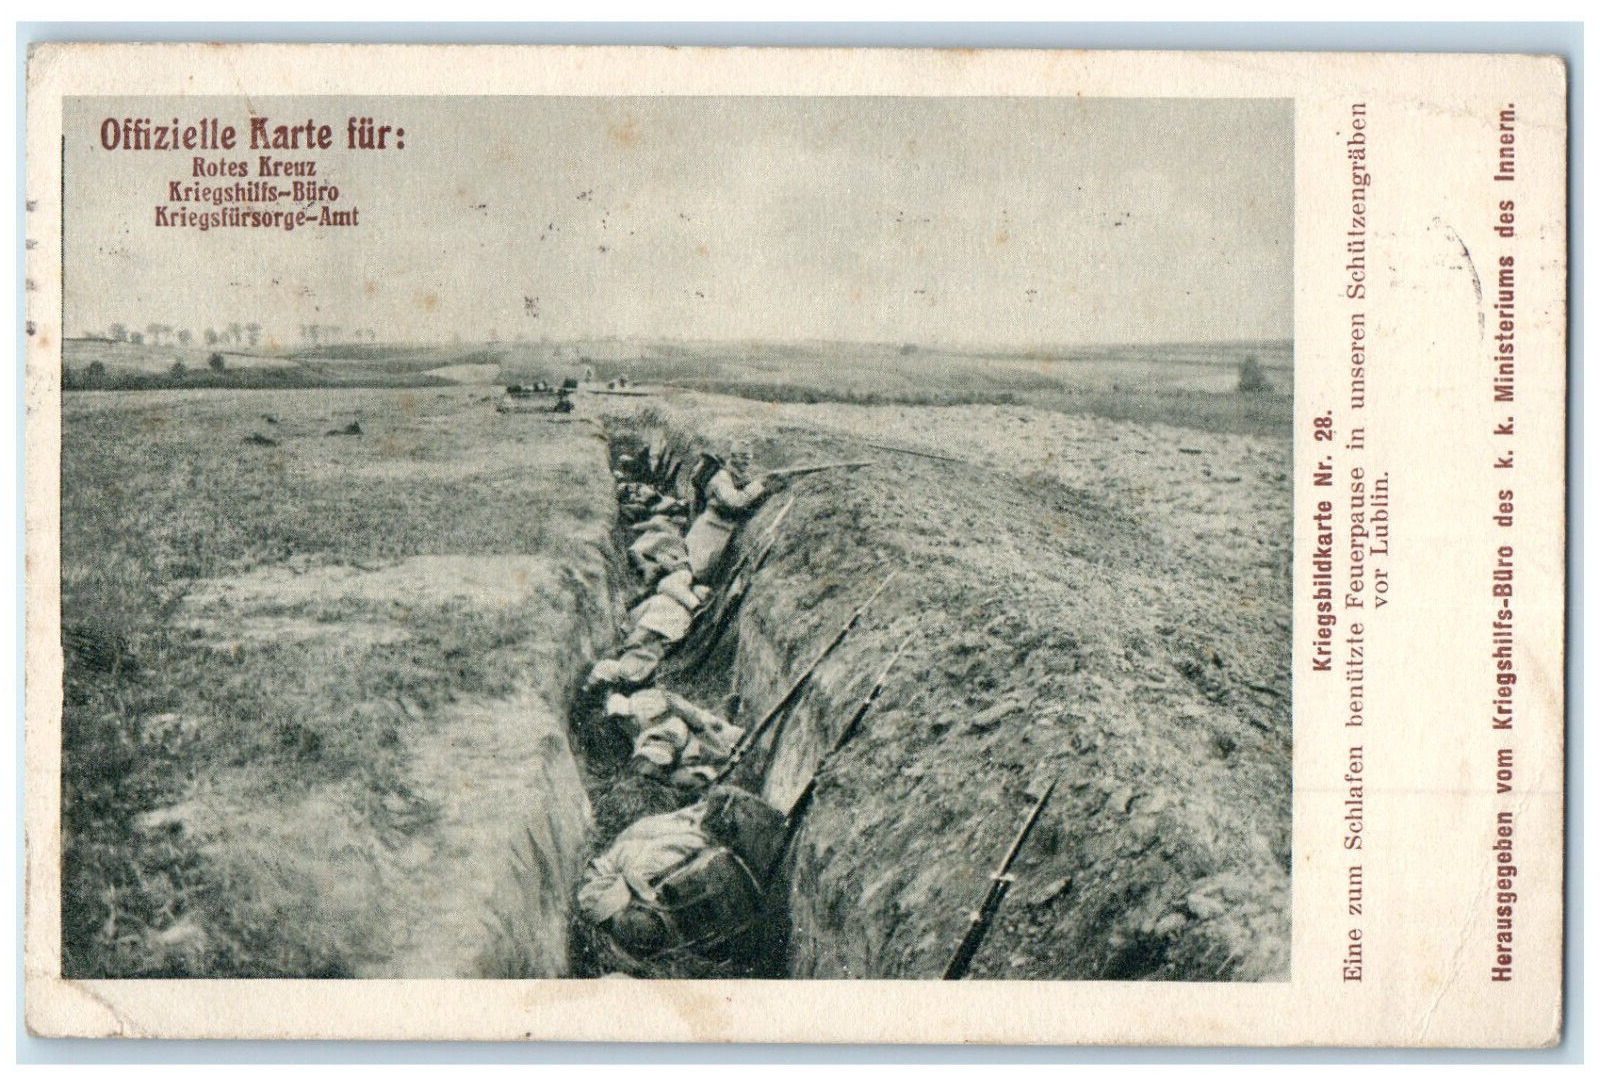 1915 A Ceasefire Used for Sleeping in Our Trenches Before Lublin WW1 Postcard